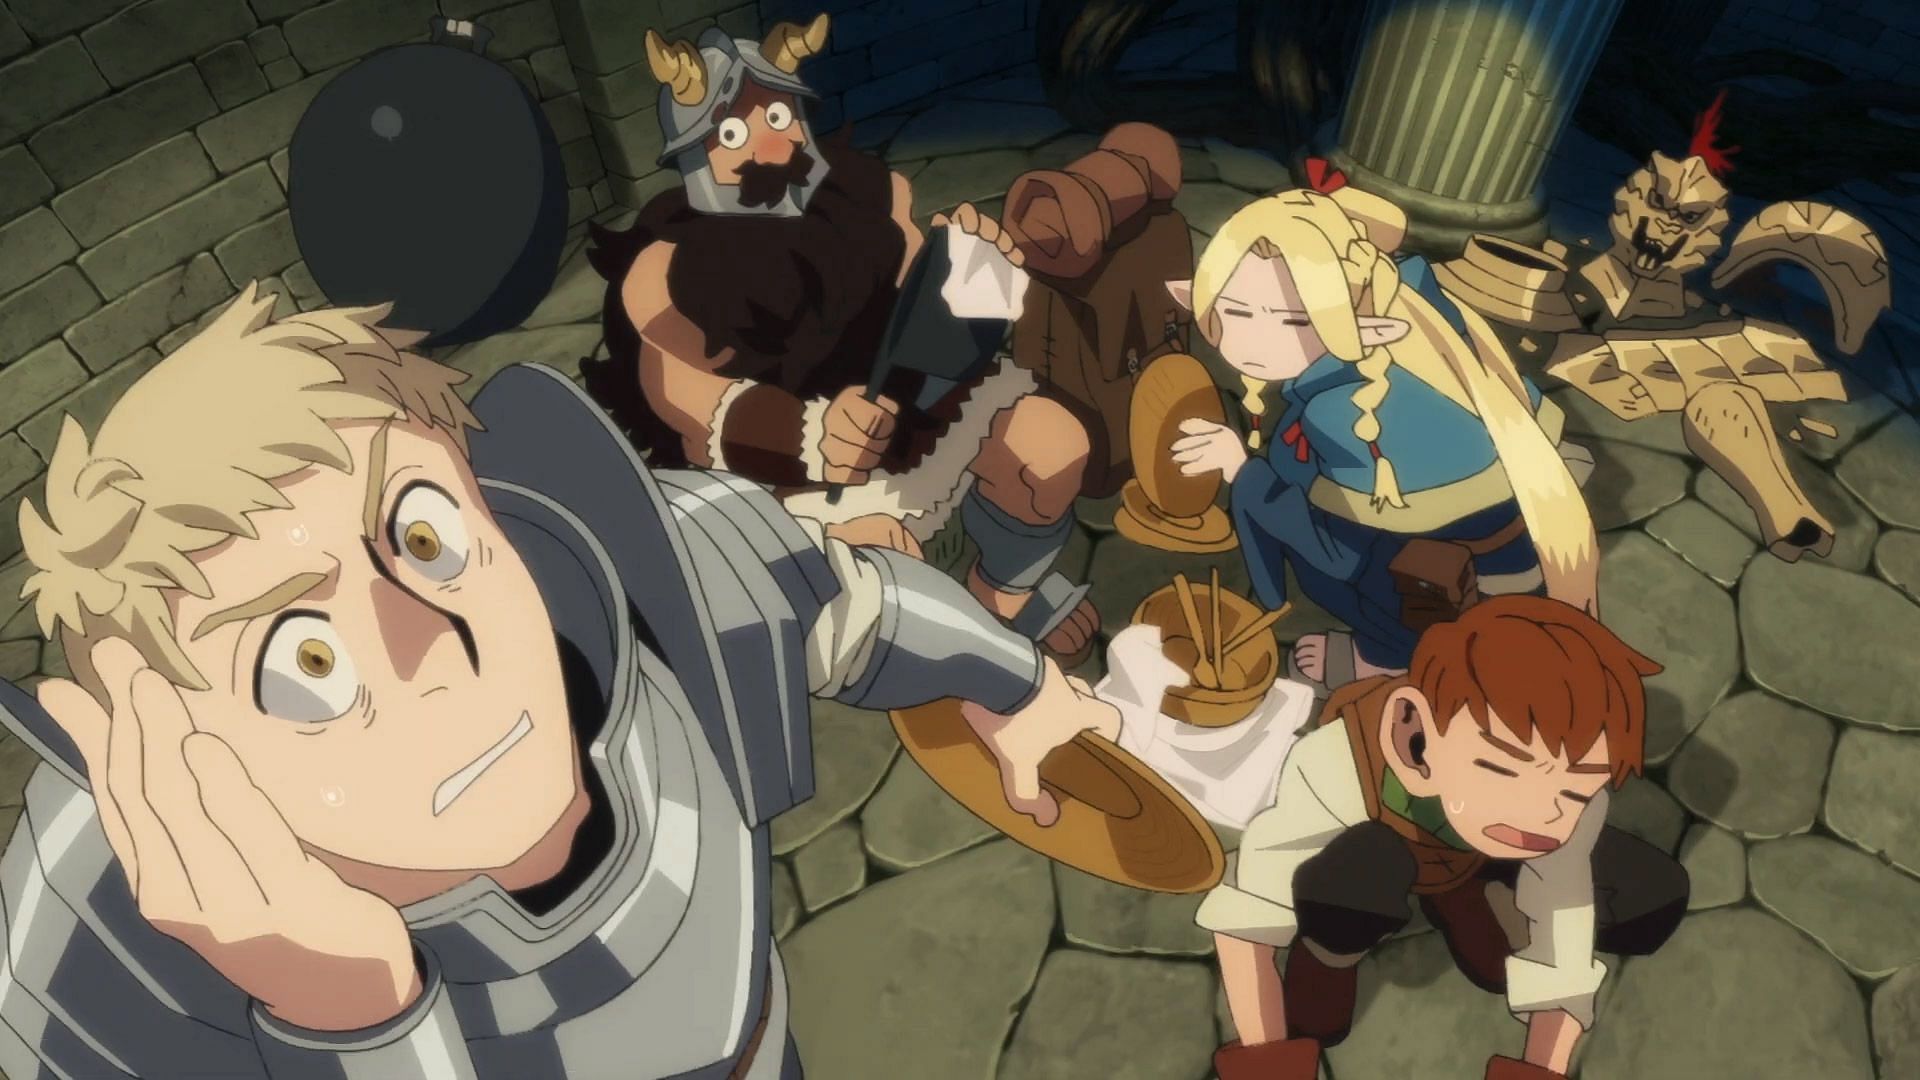 Damien Haas and Emily Rudd join Delicious in Dungeon English voice cast (Image via Studio Trigger)